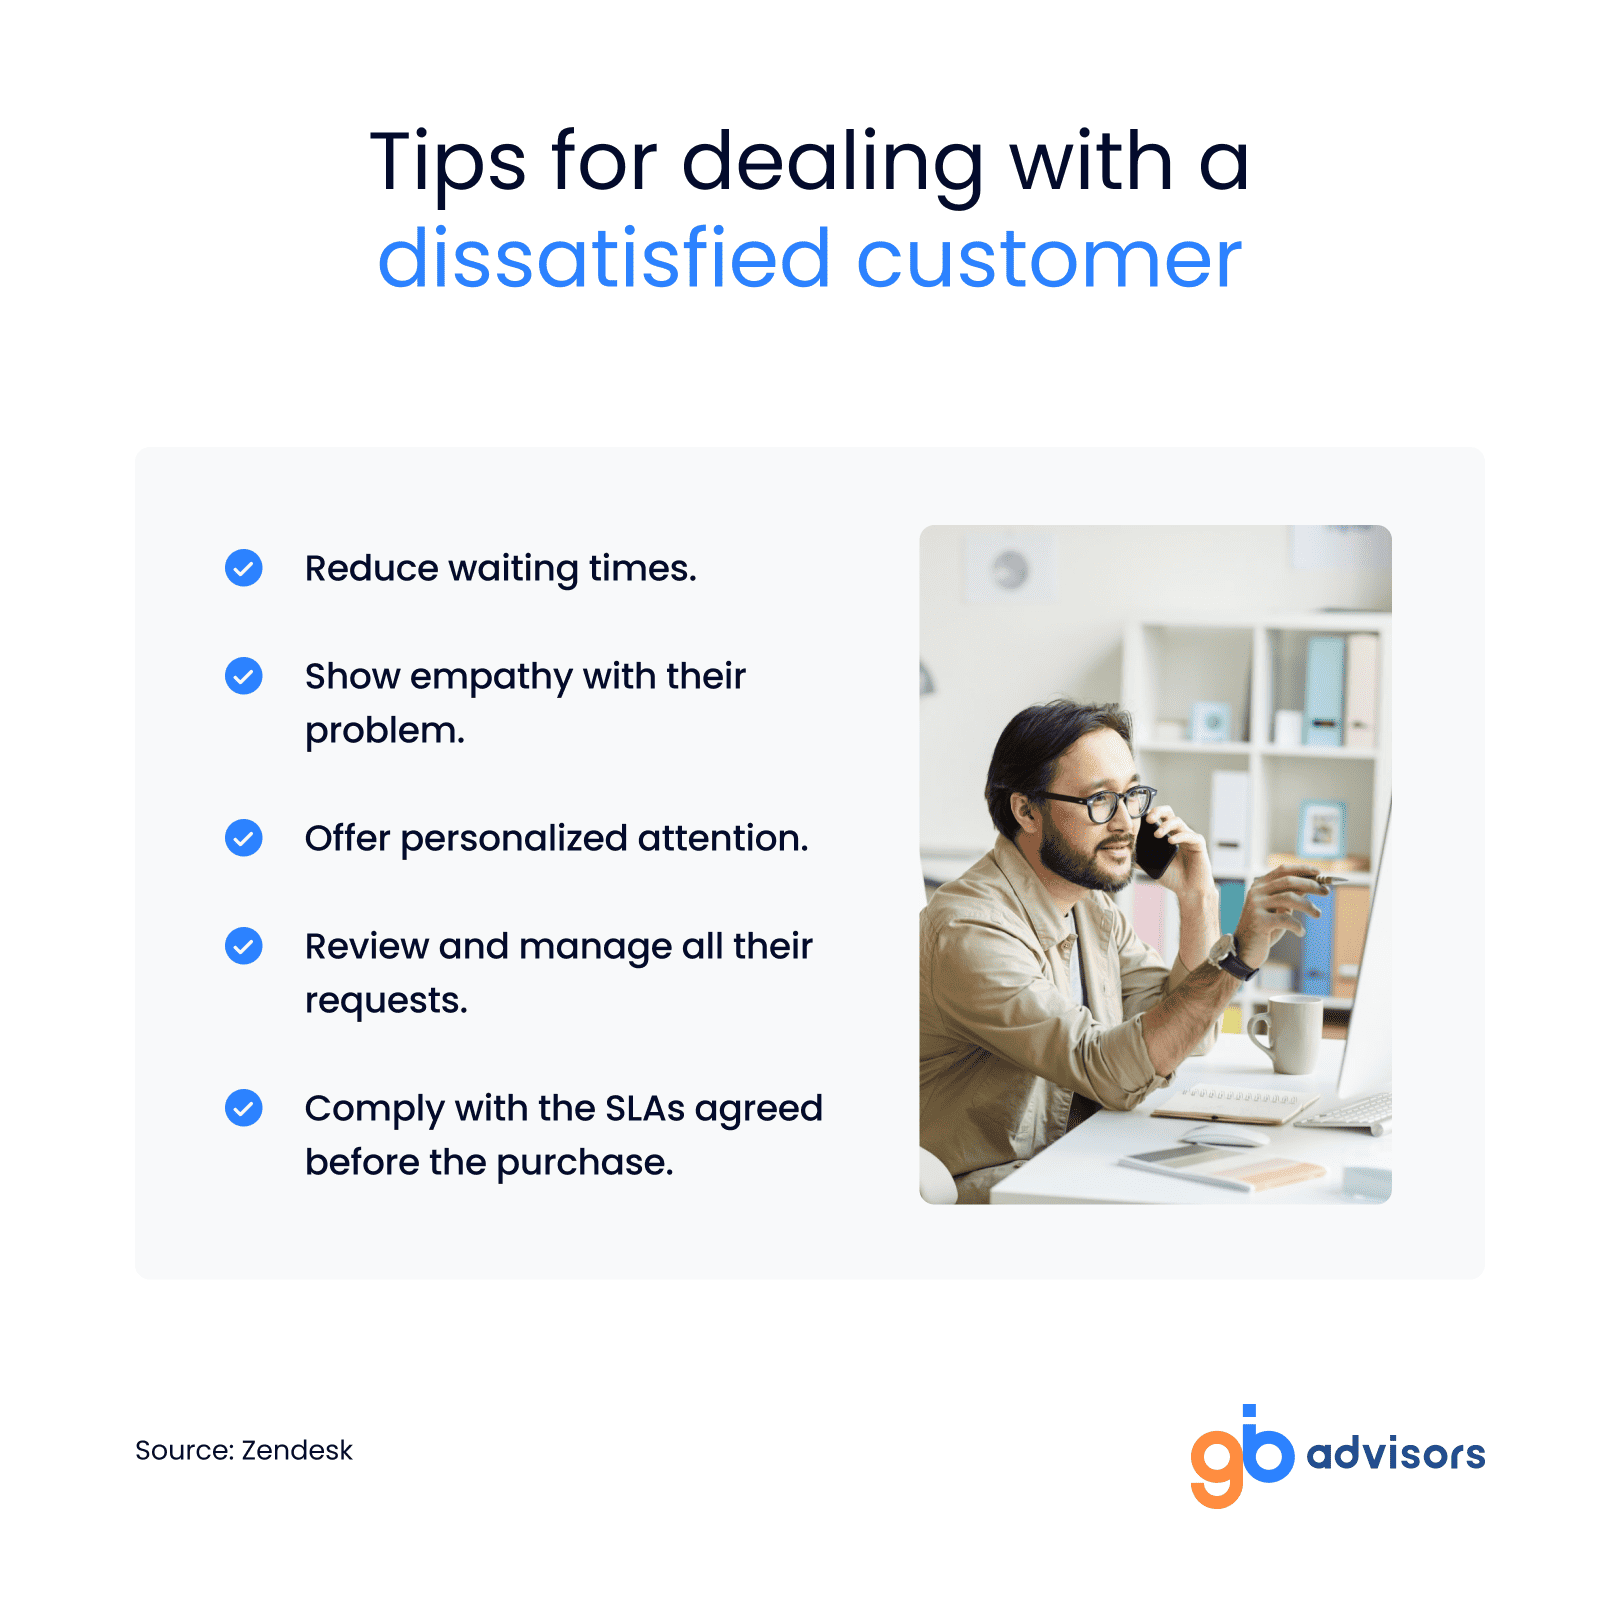 Tips for dealing with a dissastified customer